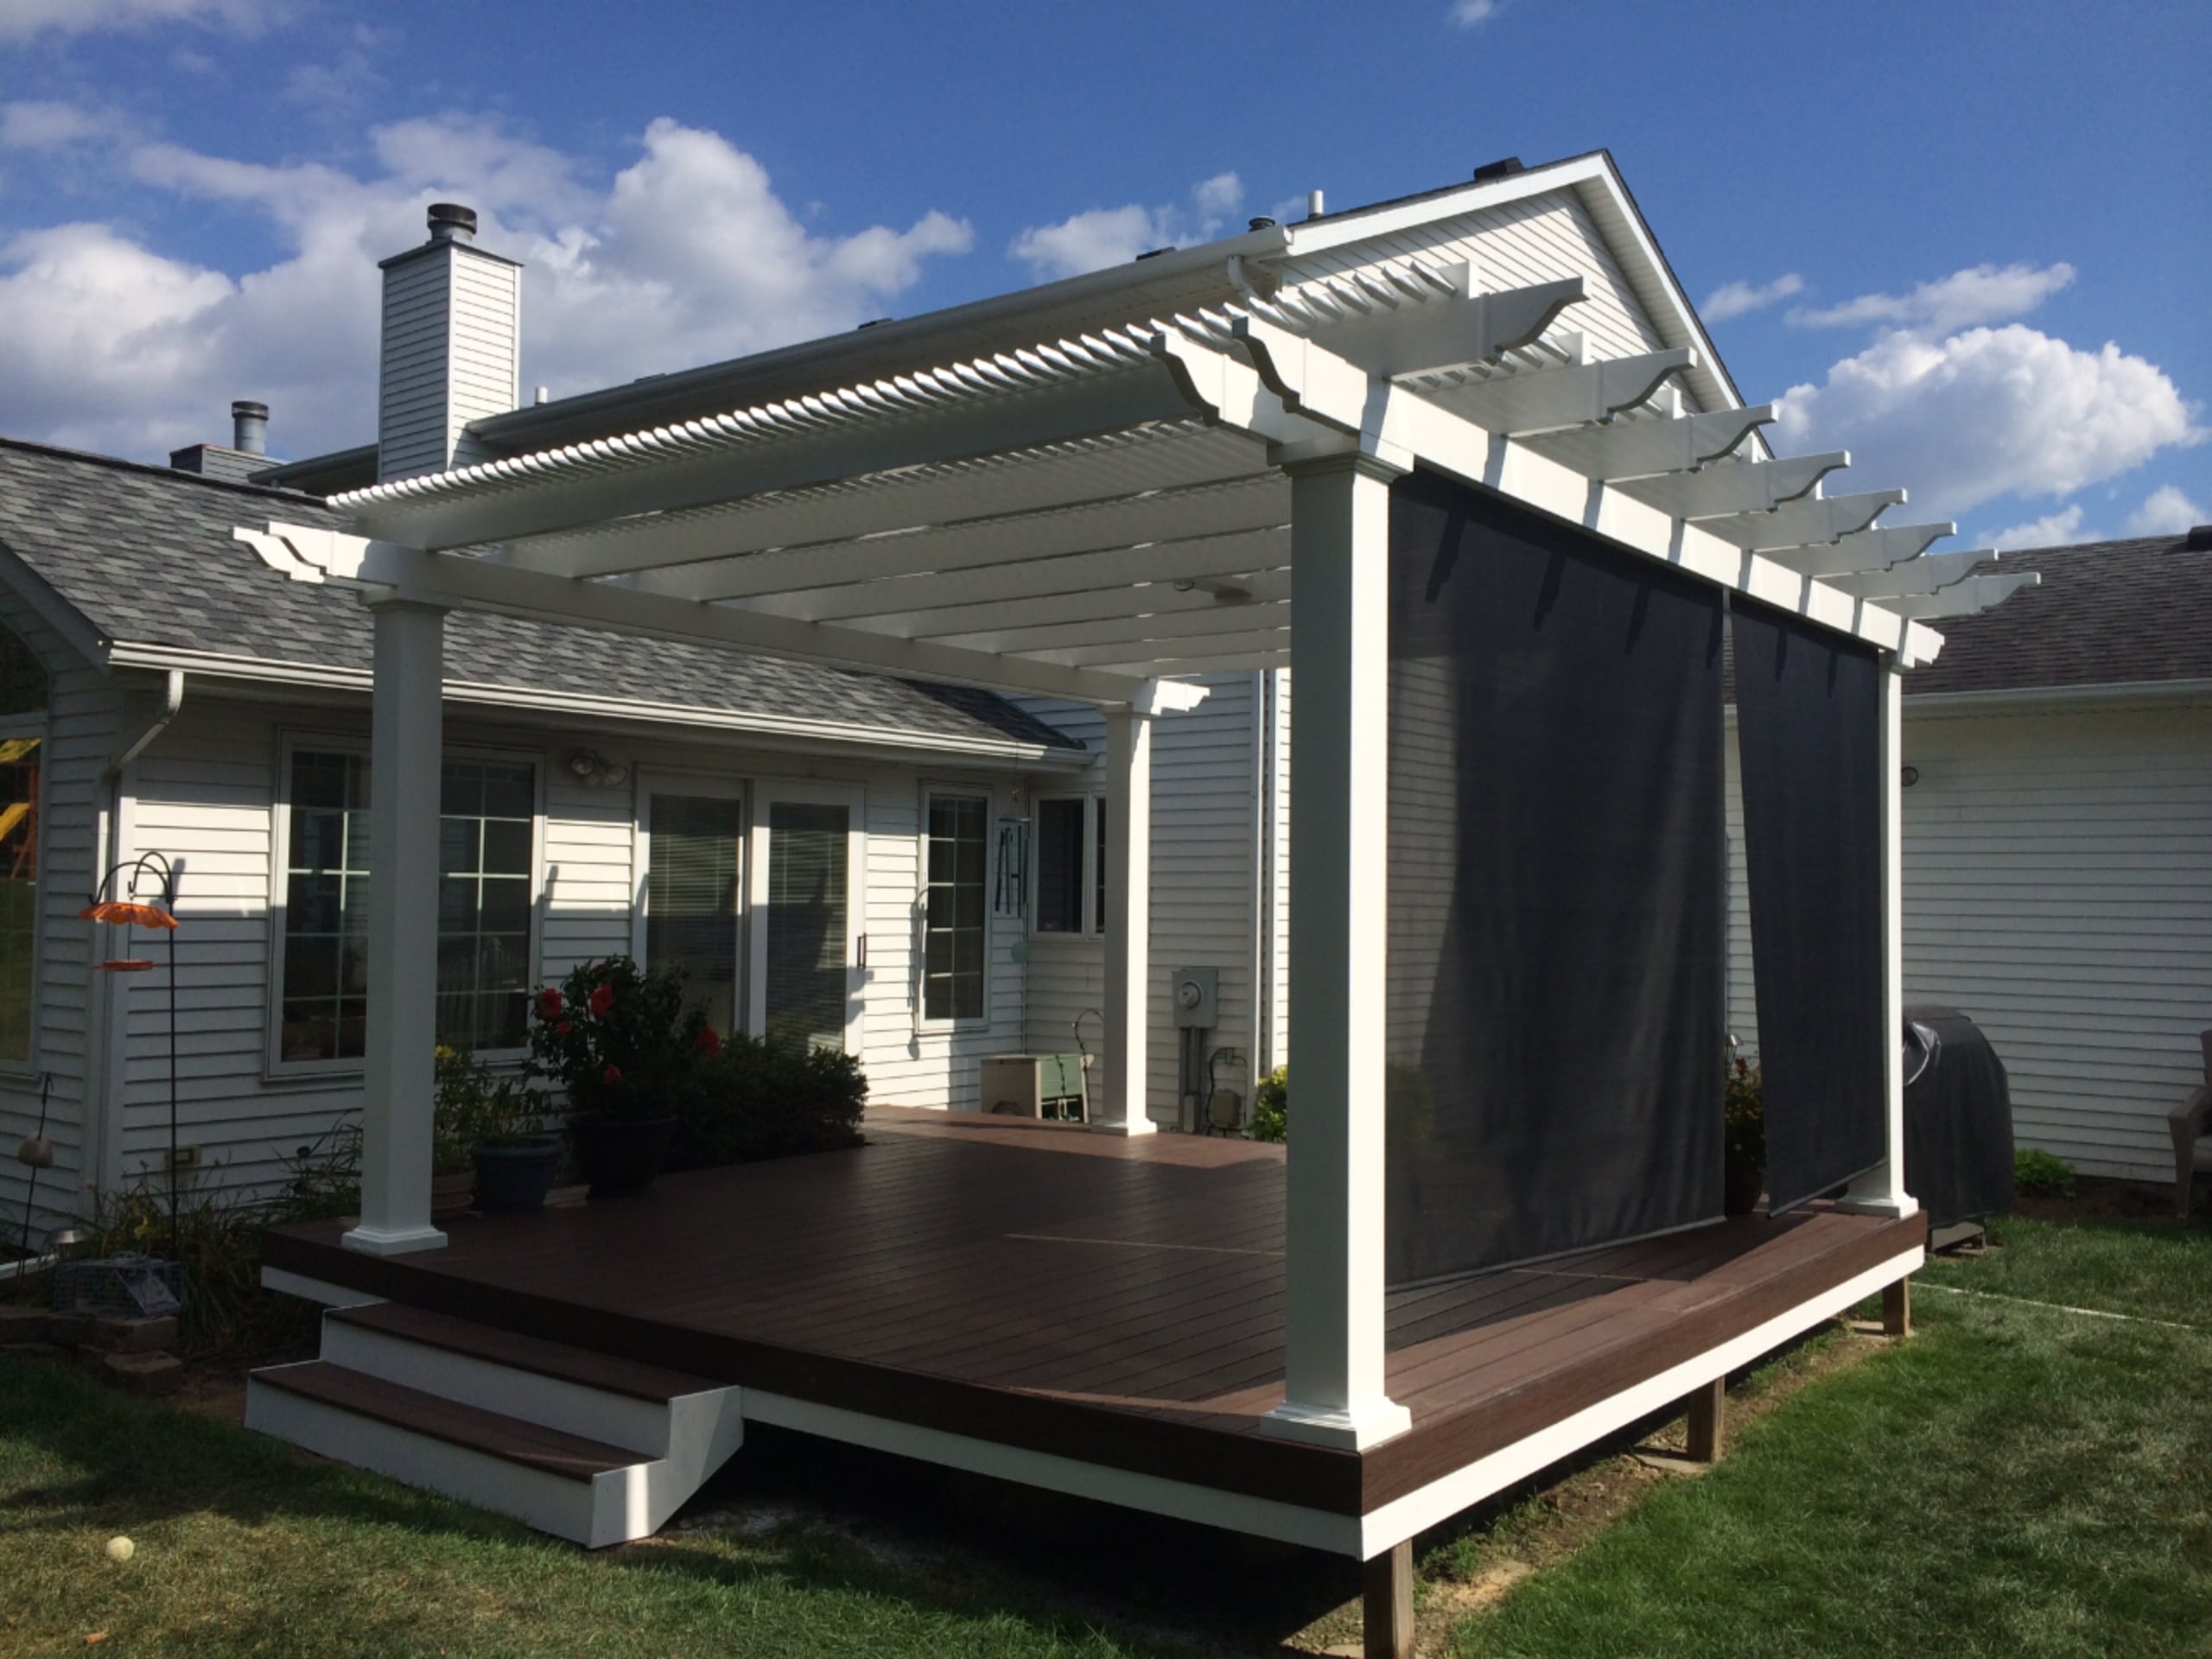 This white house has a white pergola connected to the back deck. There are two steps connecting the deck to the lawn, and there is a bird feeder next to the deck.